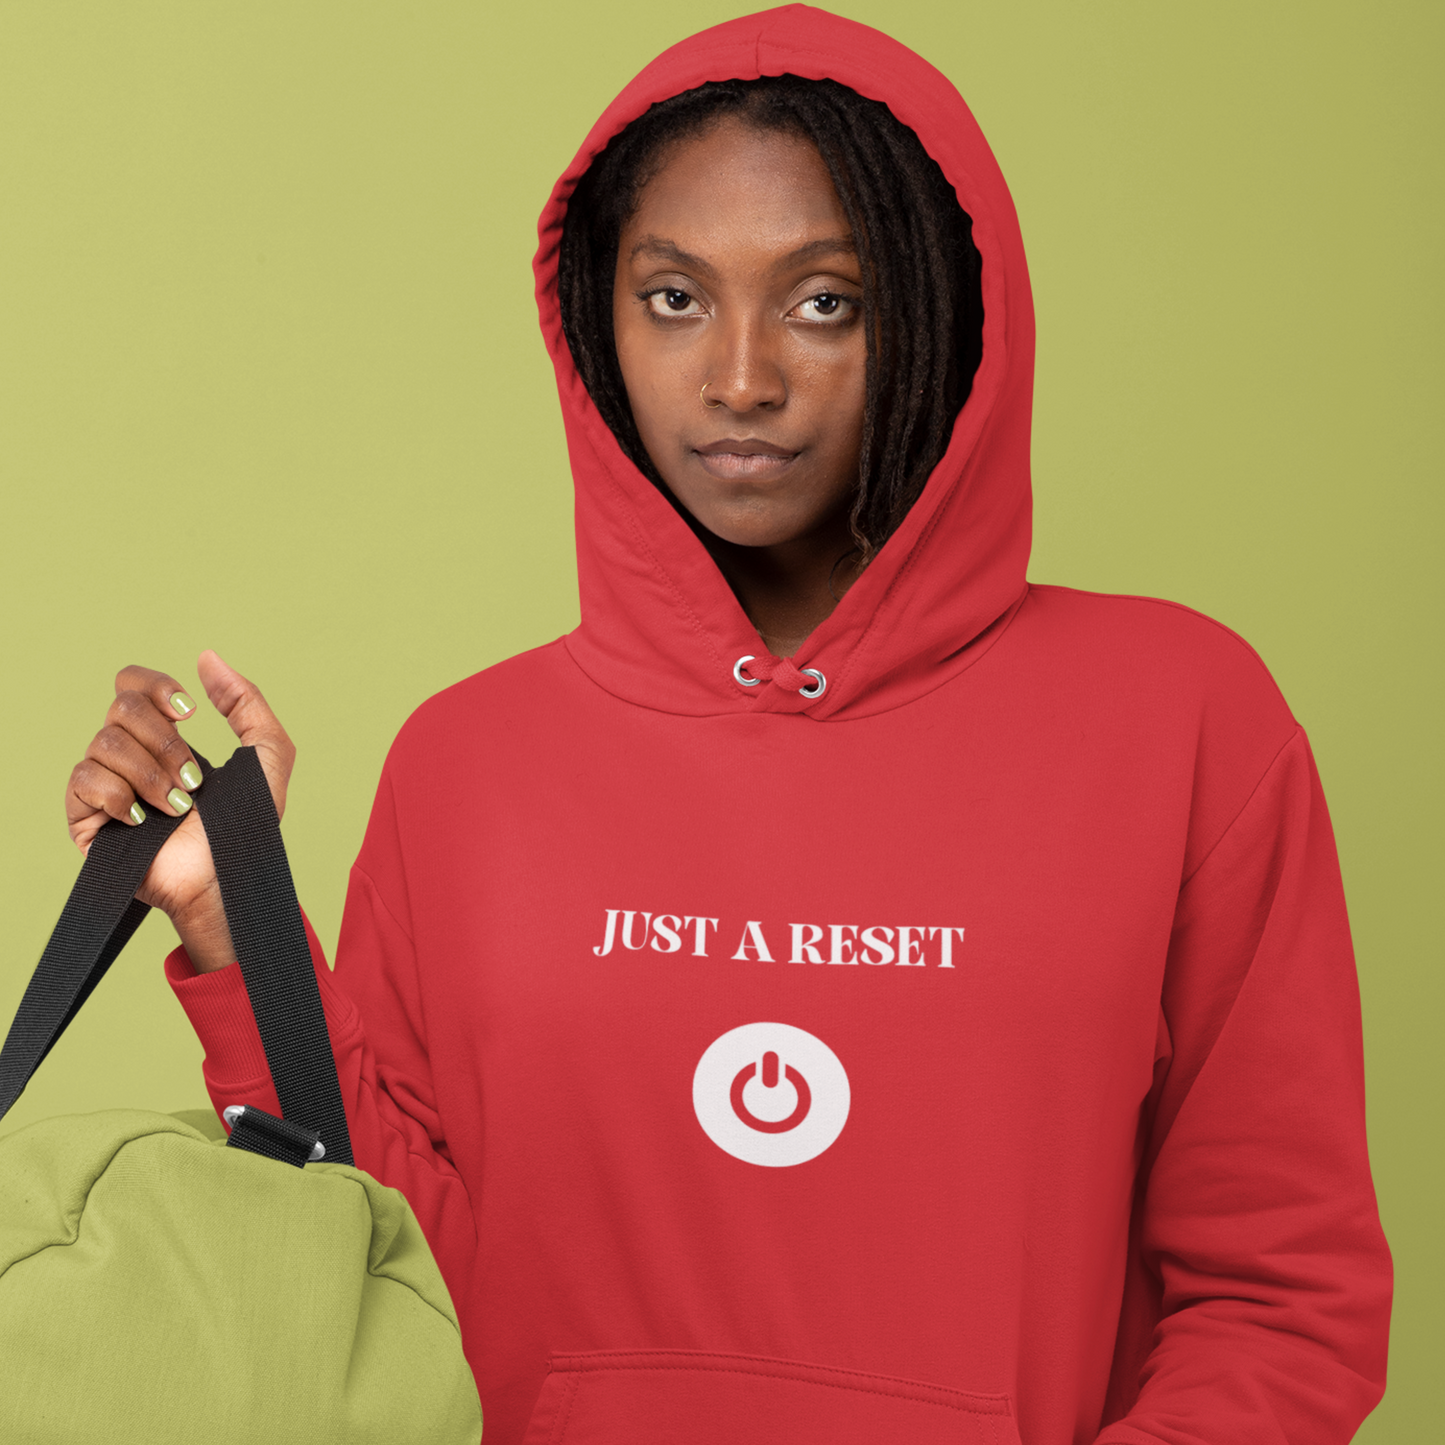 Just a reset hooded sweatshirt gift, hoodie gift to celebrate mental wellbeing, sweatshirt gift for friends and family